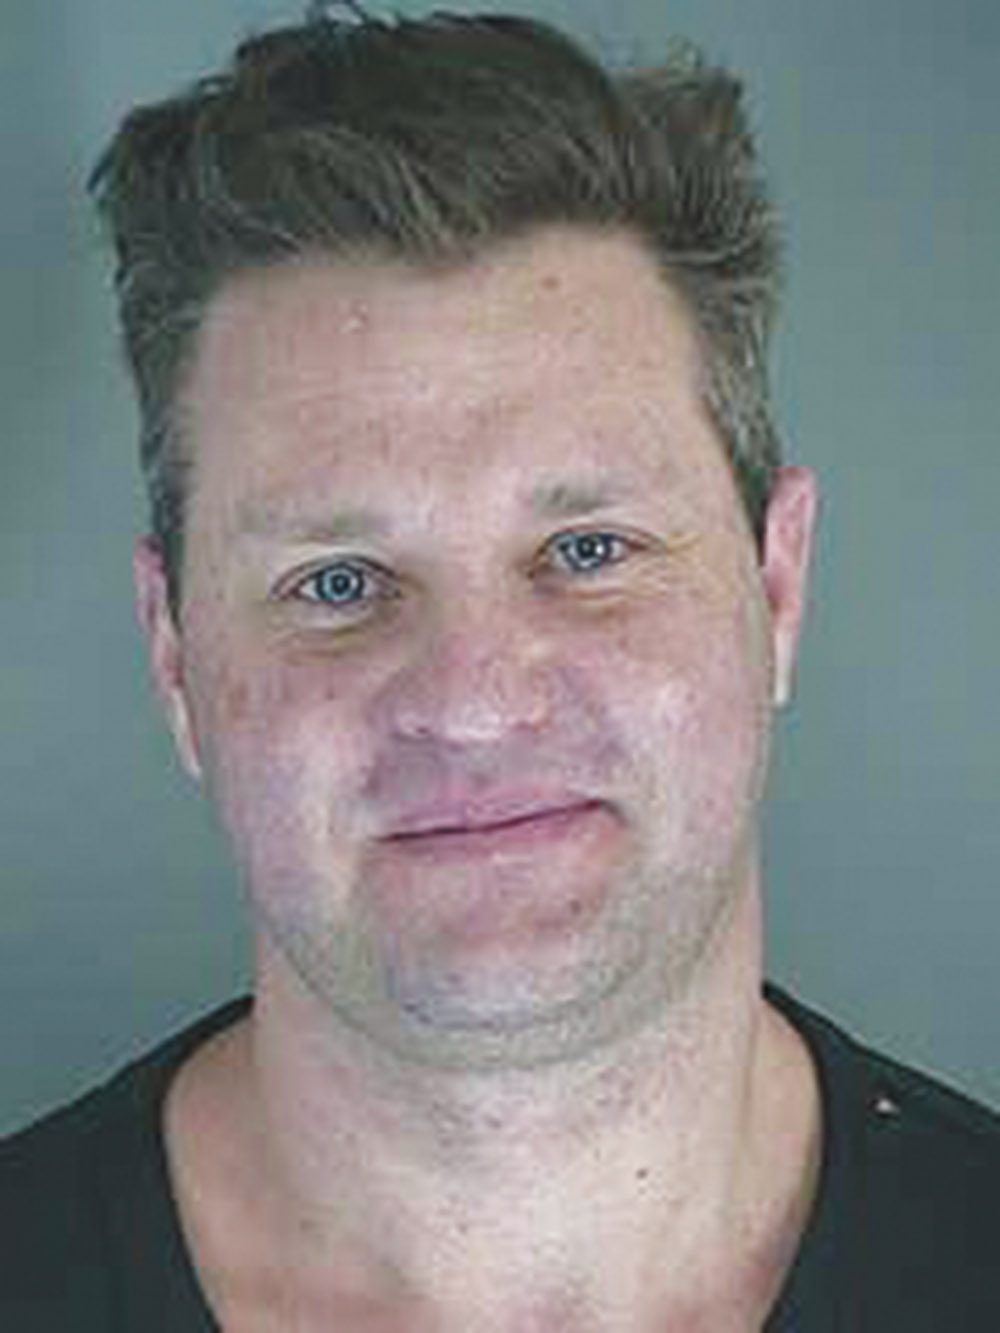 Zachery Ty Bryan was arrested in Eugene, Oregon, on Oct. 16, 2020, and charged with assault.